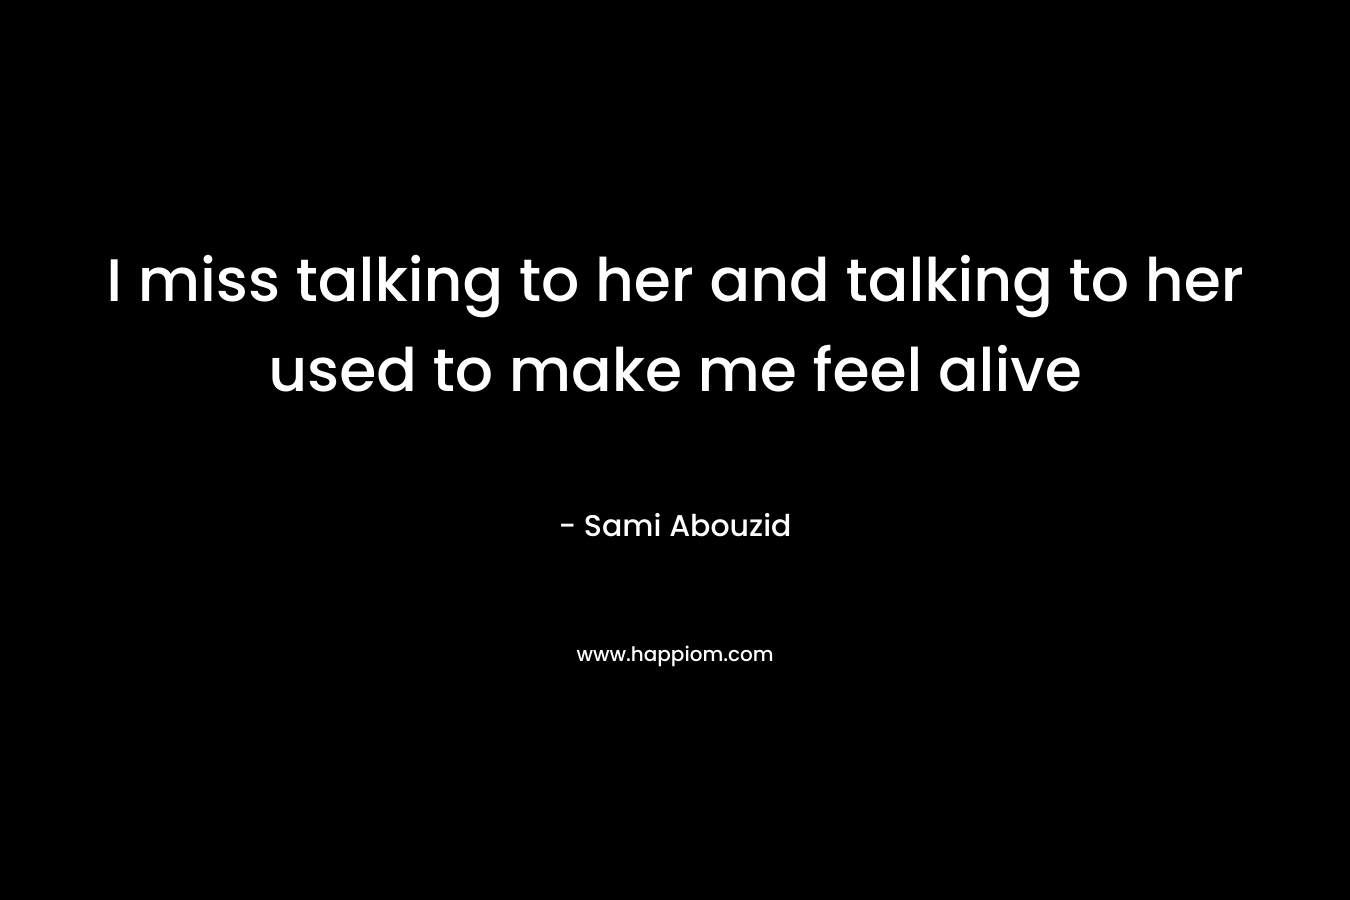 I miss talking to her and talking to her used to make me feel alive